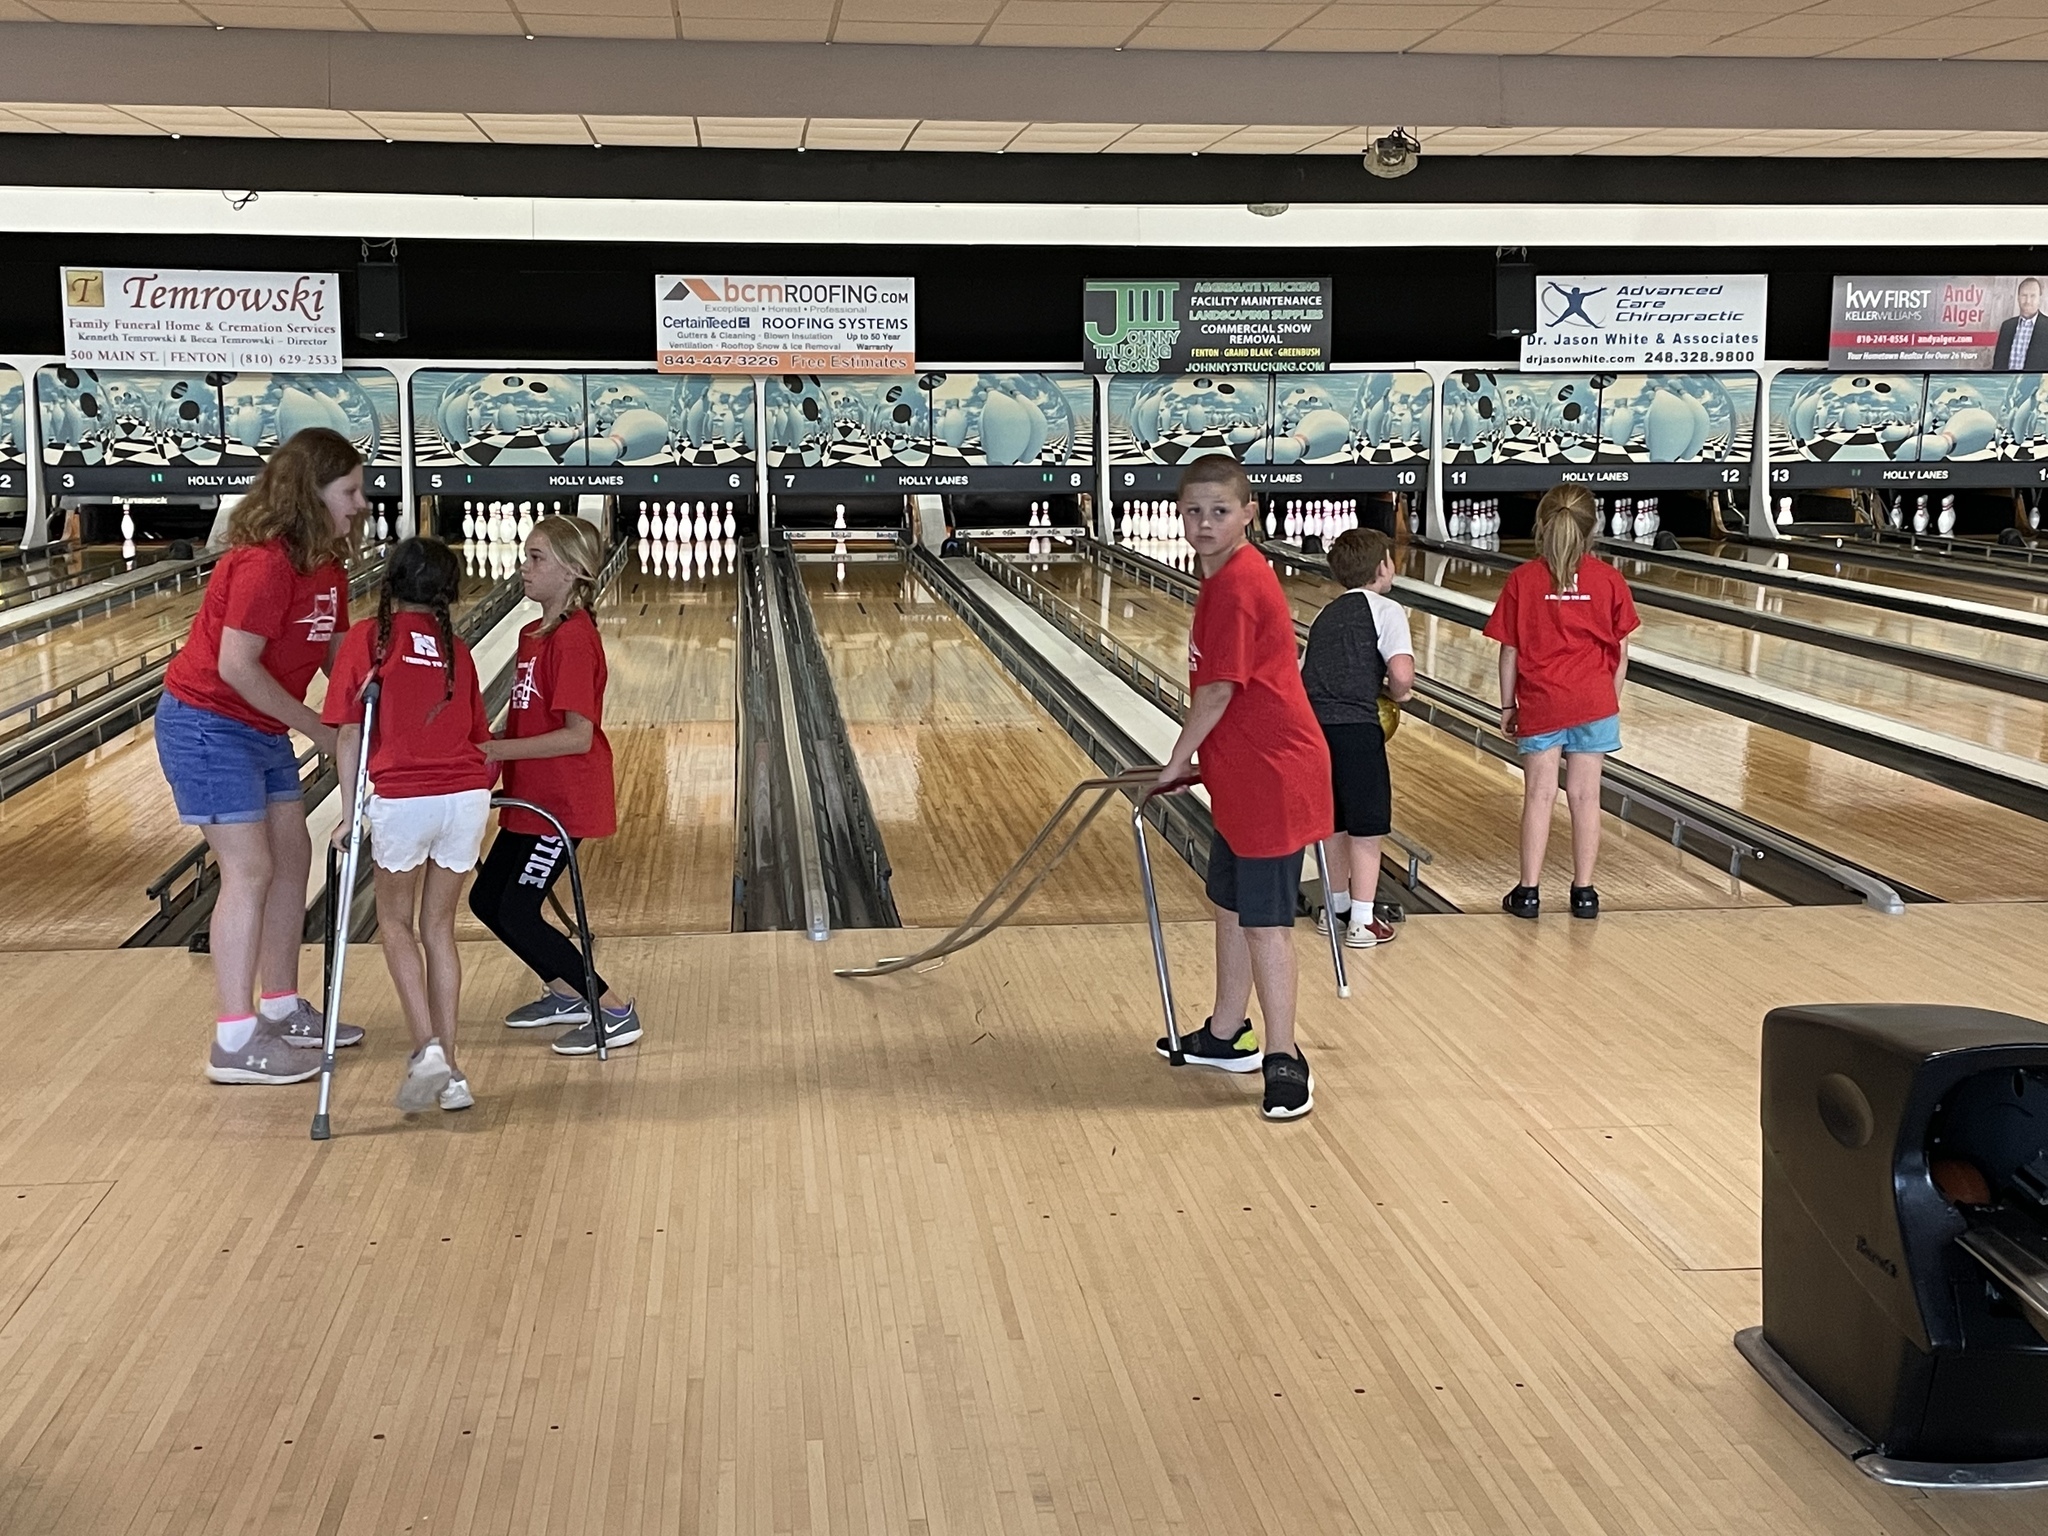 Students assisting other students at the bowling alley